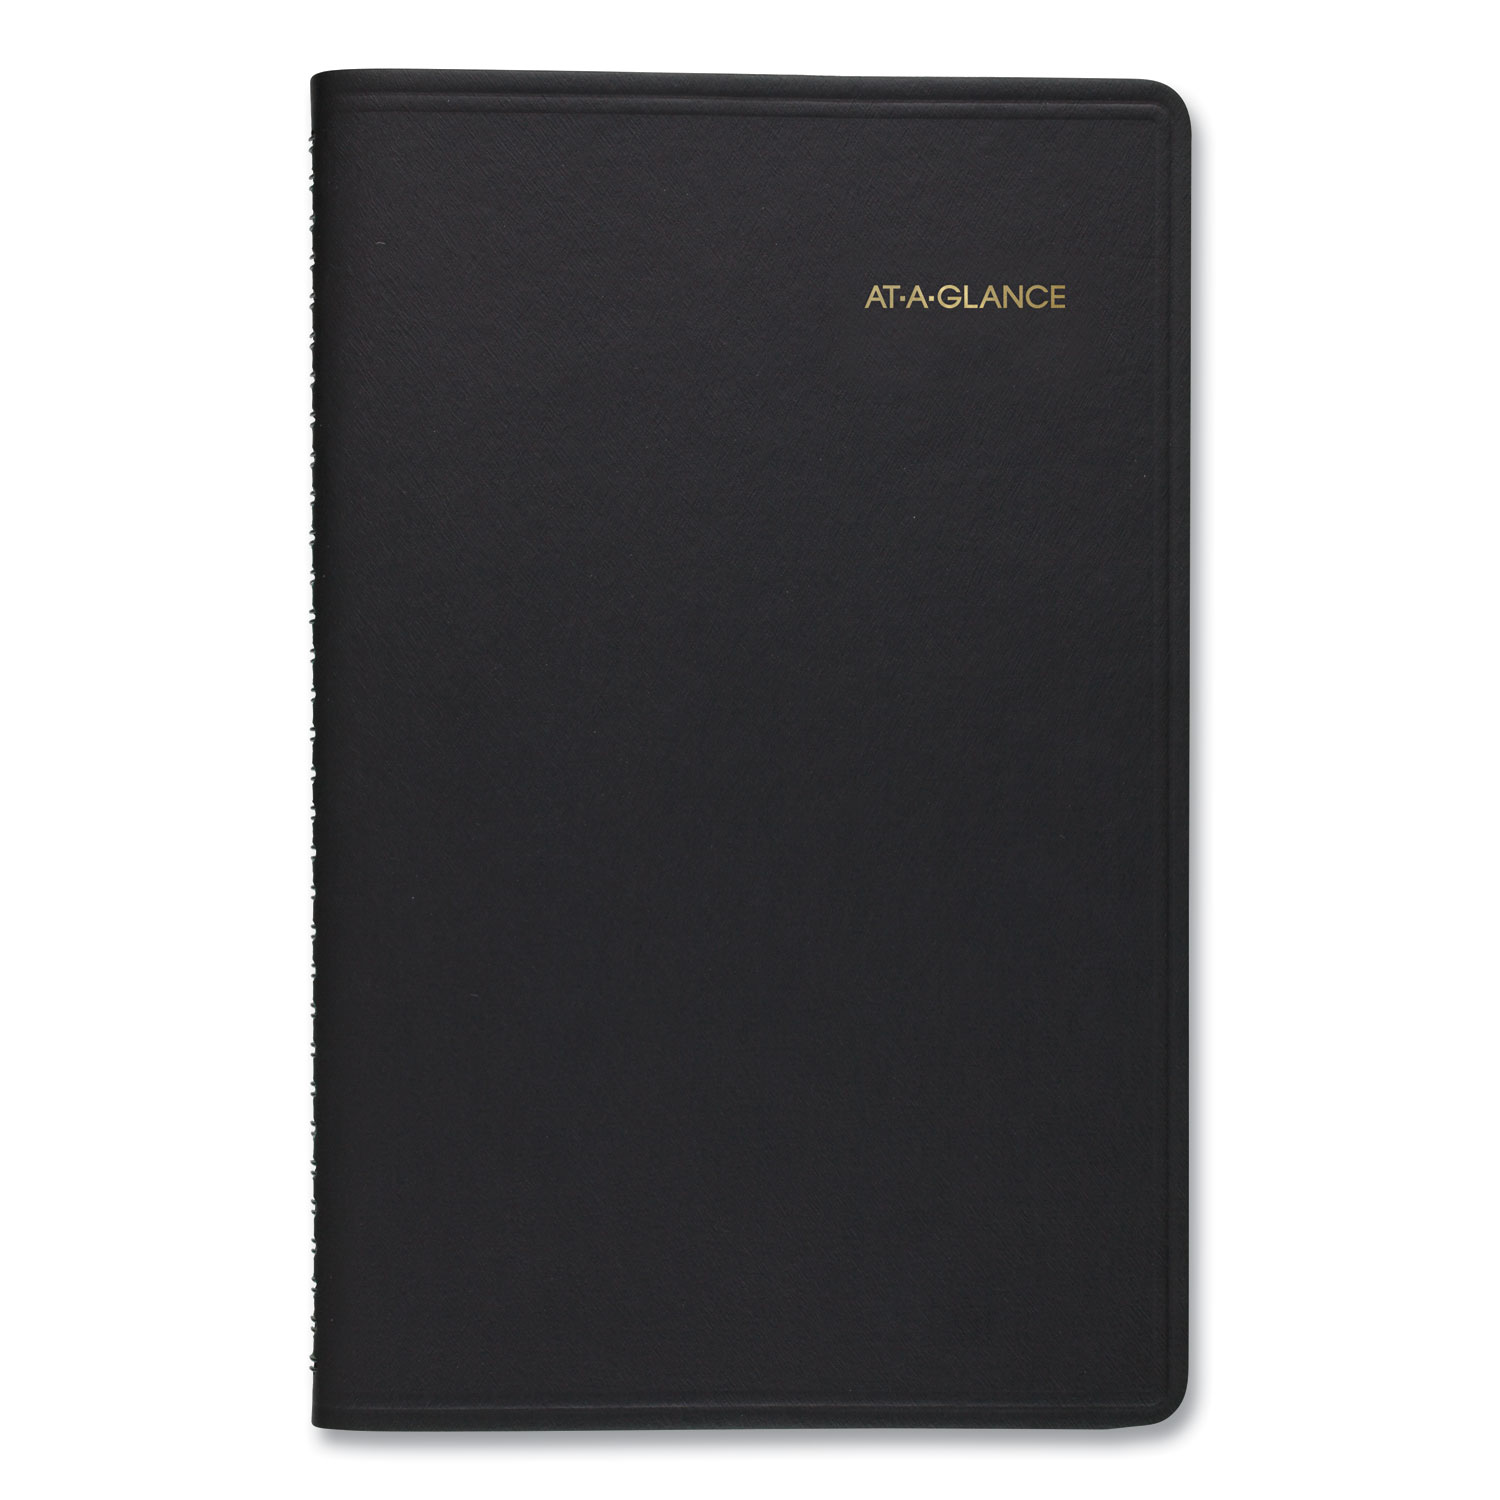  AT-A-GLANCE 7010005 Weekly Appointment Book, Hourly Appt, Phone/Address Tabs, 8 x 4 7/8, Black, 2020 (AAG7010005) 